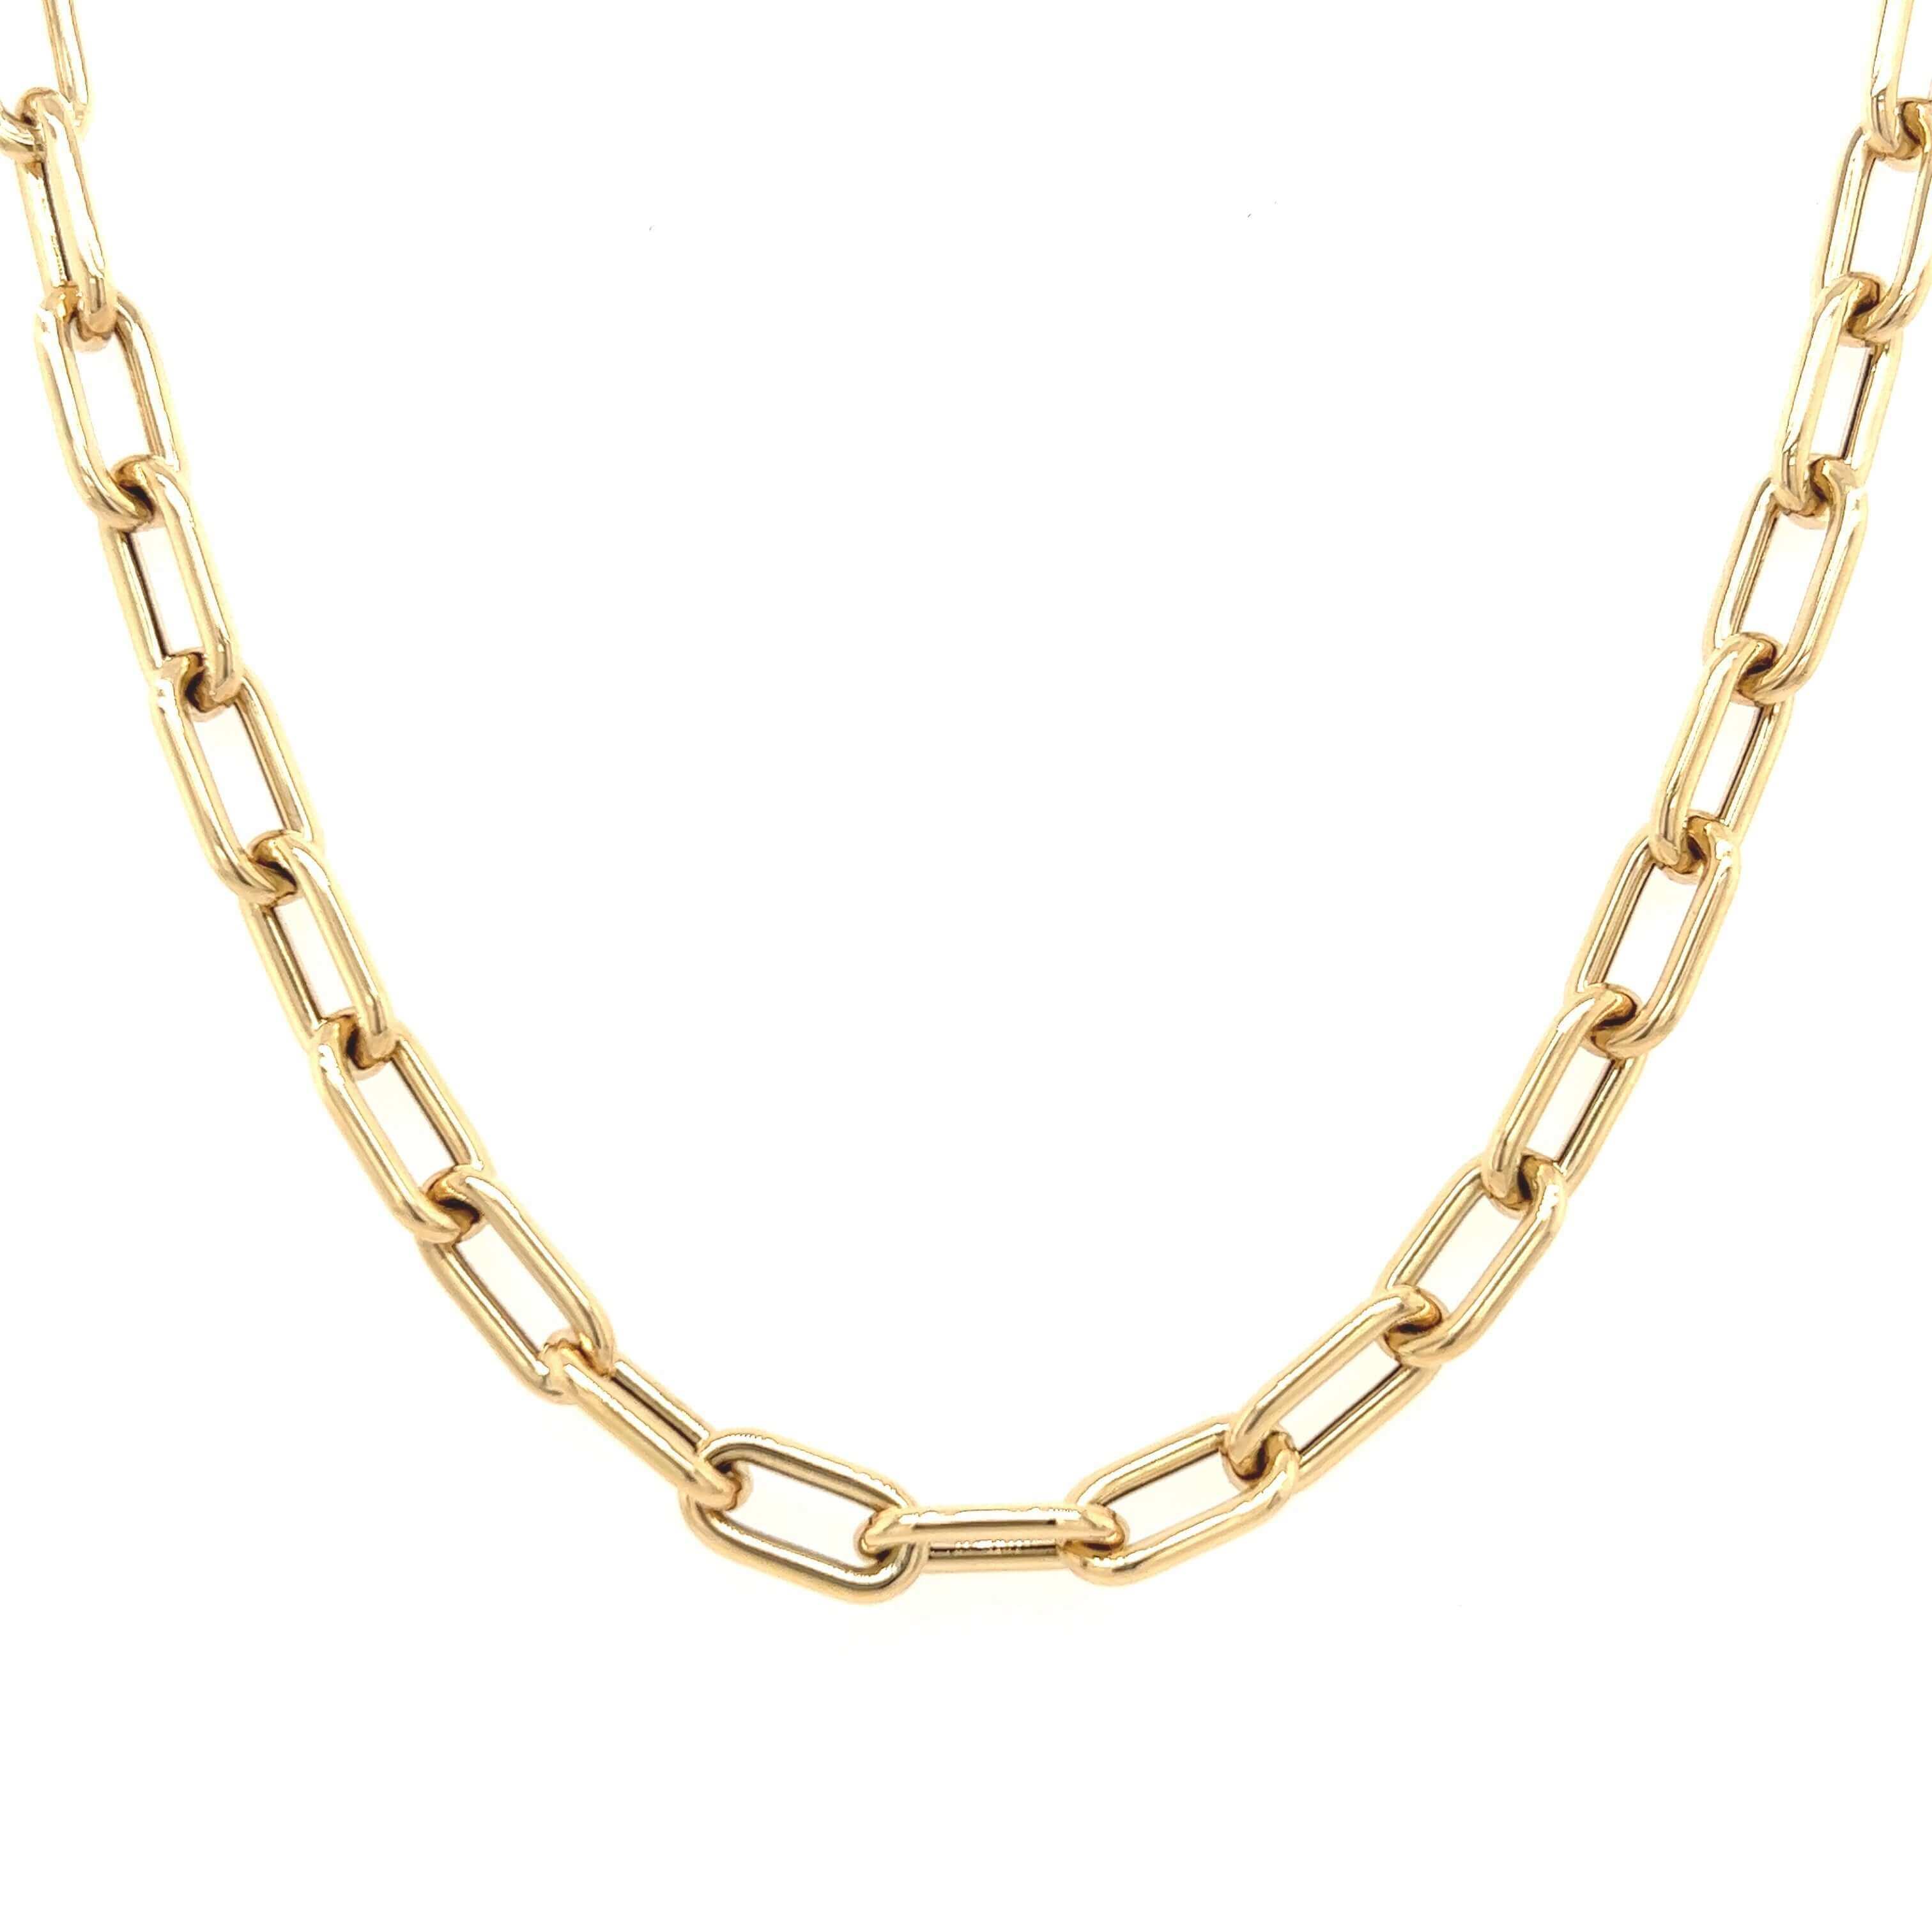 Gold Oval Chain with Gold Pave Diamond Lobster Clasp. Can be worn long or  doubled. - Mina Danielle Jewelry